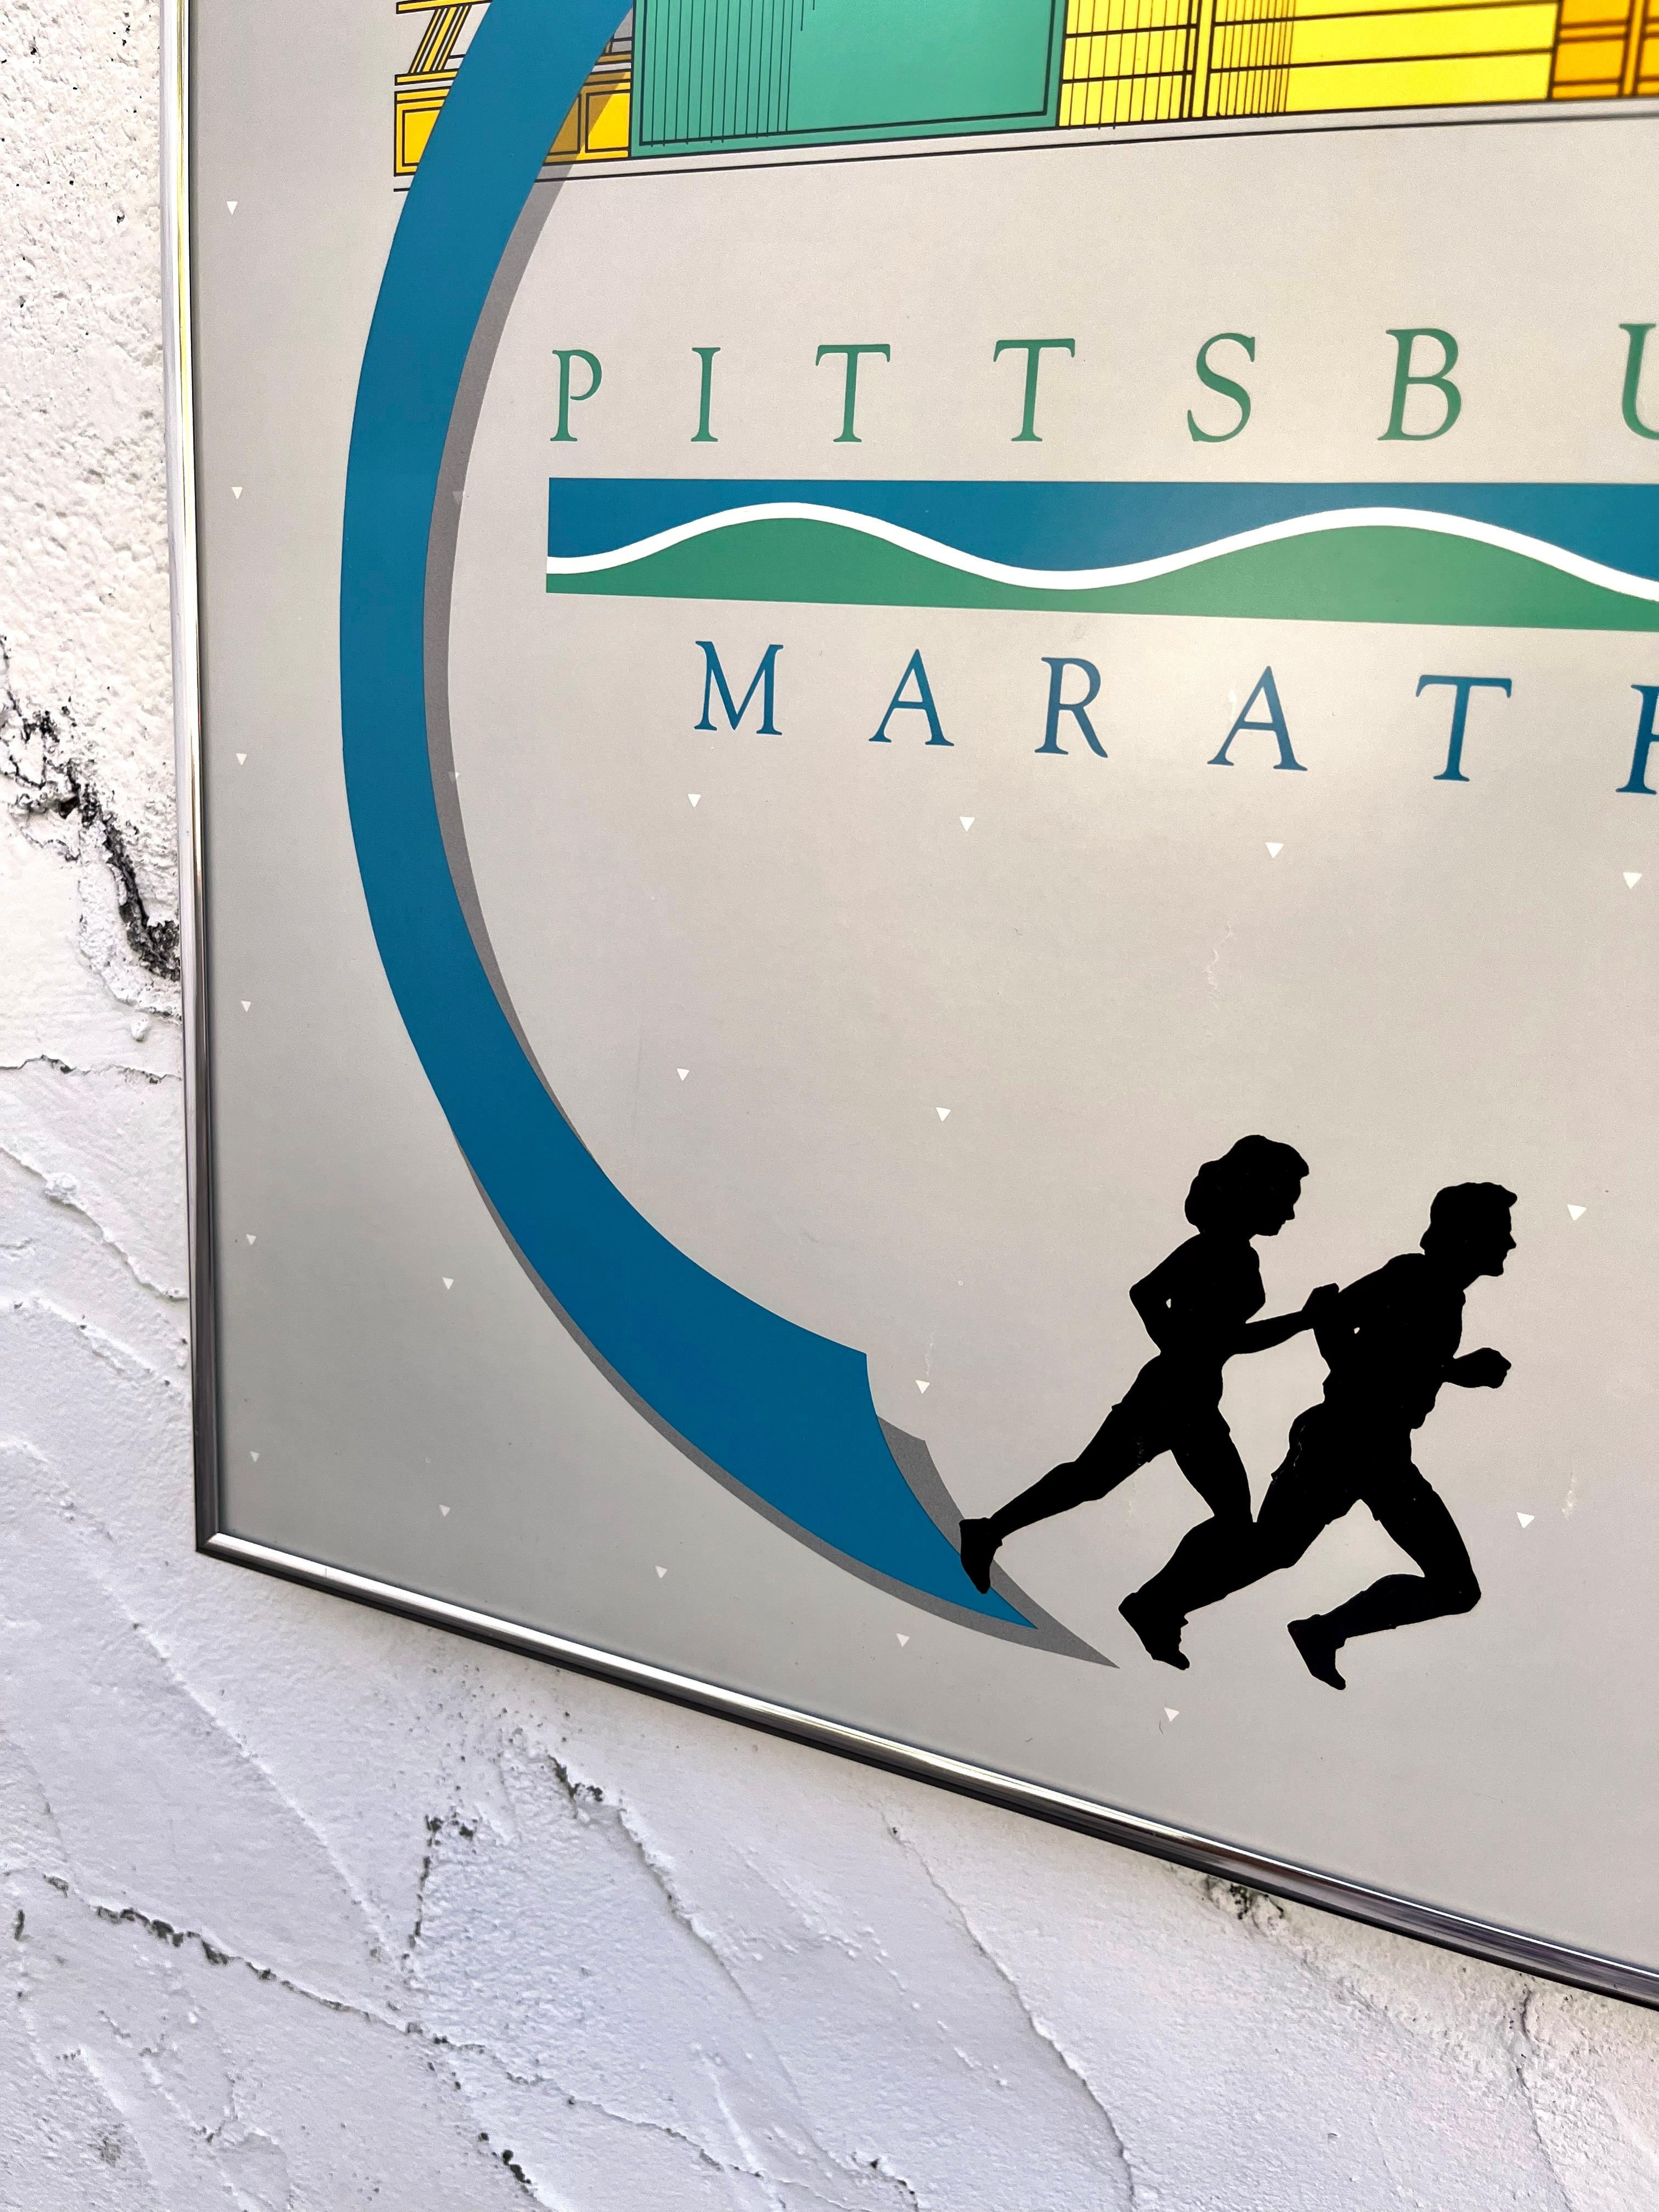 Original 1987 Pittsburgh Marathon Promotional Framed Poster In Good Condition For Sale In Miami, FL